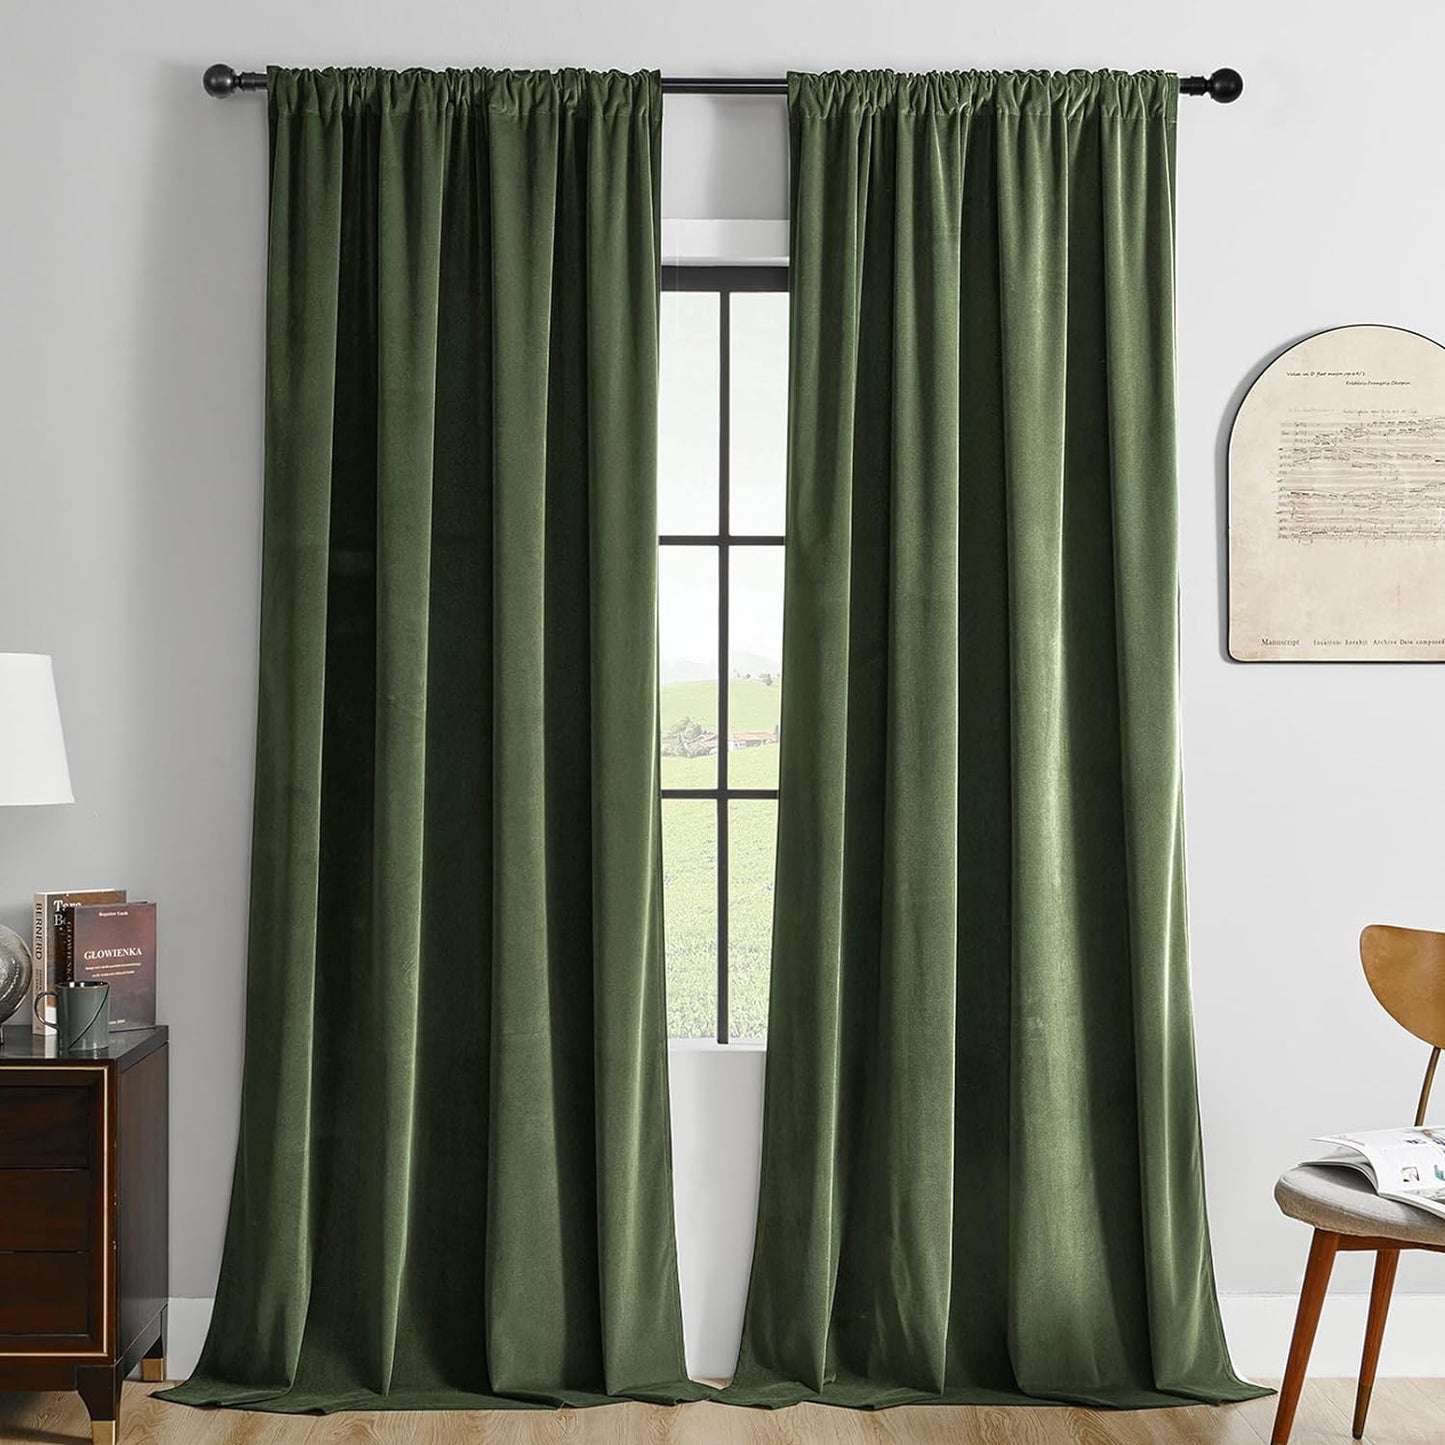 Joydeco Black Velvet Curtains 90 Inch Length 2 Panels, Luxury Blackout Rod Pocket Thermal Insulated Window Curtains, Super Soft Room Darkening Drapes for Living Dining Room Bedroom,W52 X L90 Inches  Joydeco Rod Pocket | Olive Green 52W X 72L Inch X 2 Panels 